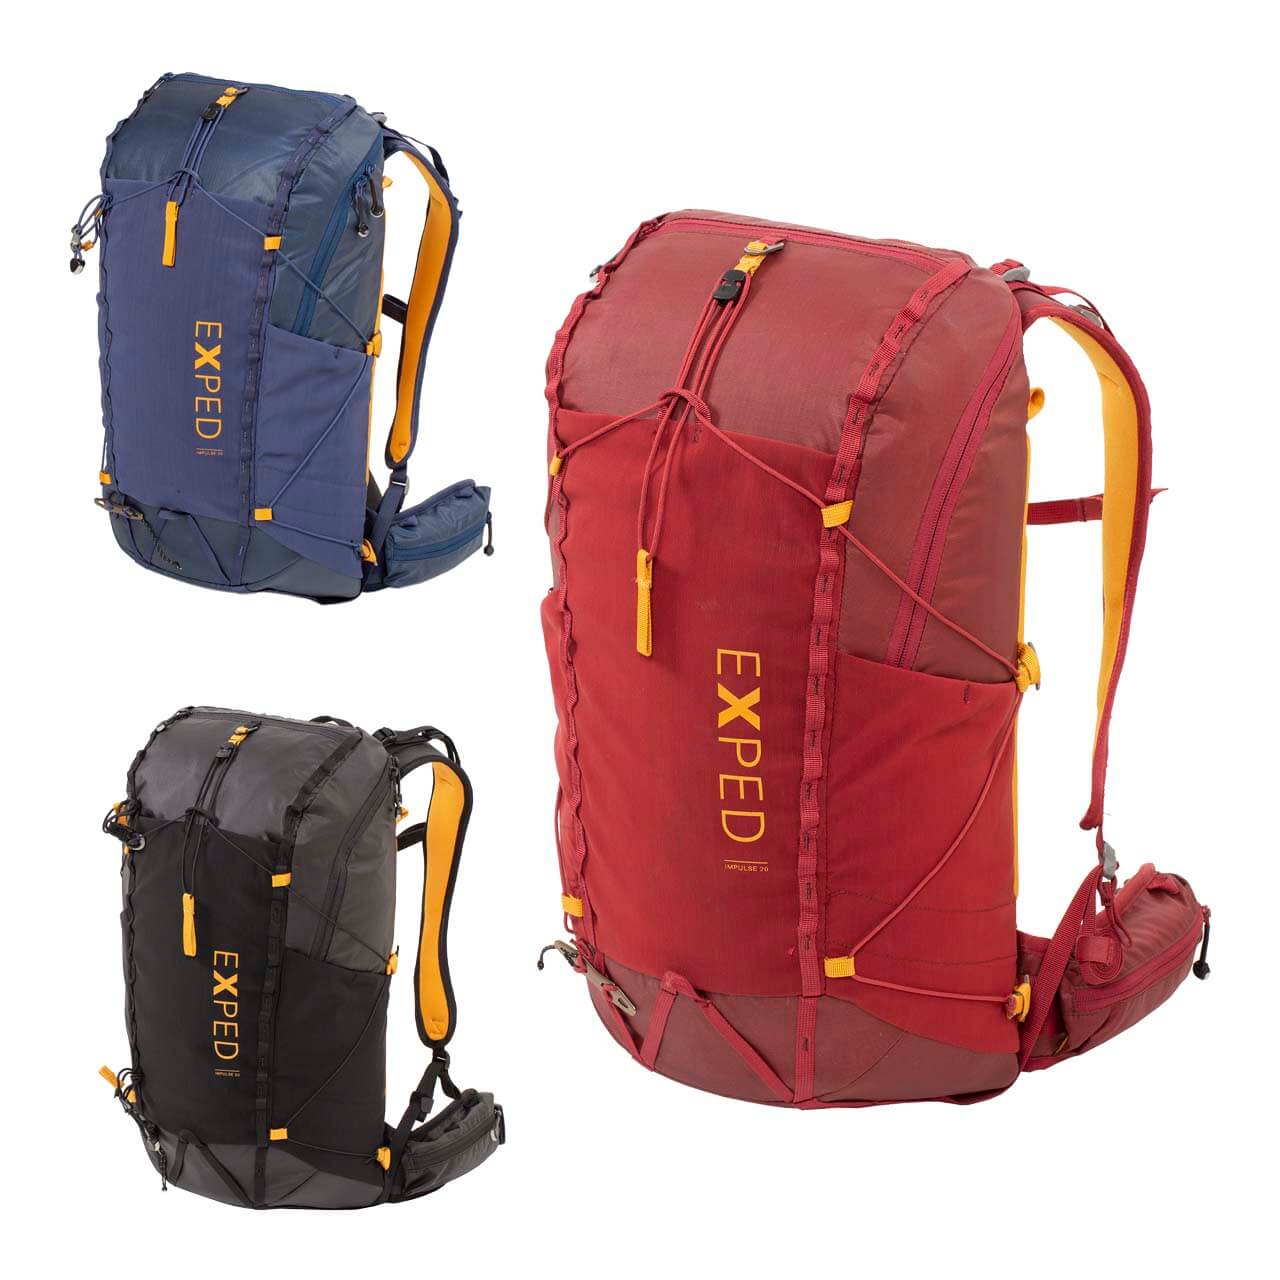 Exped Daypack Impulse 20